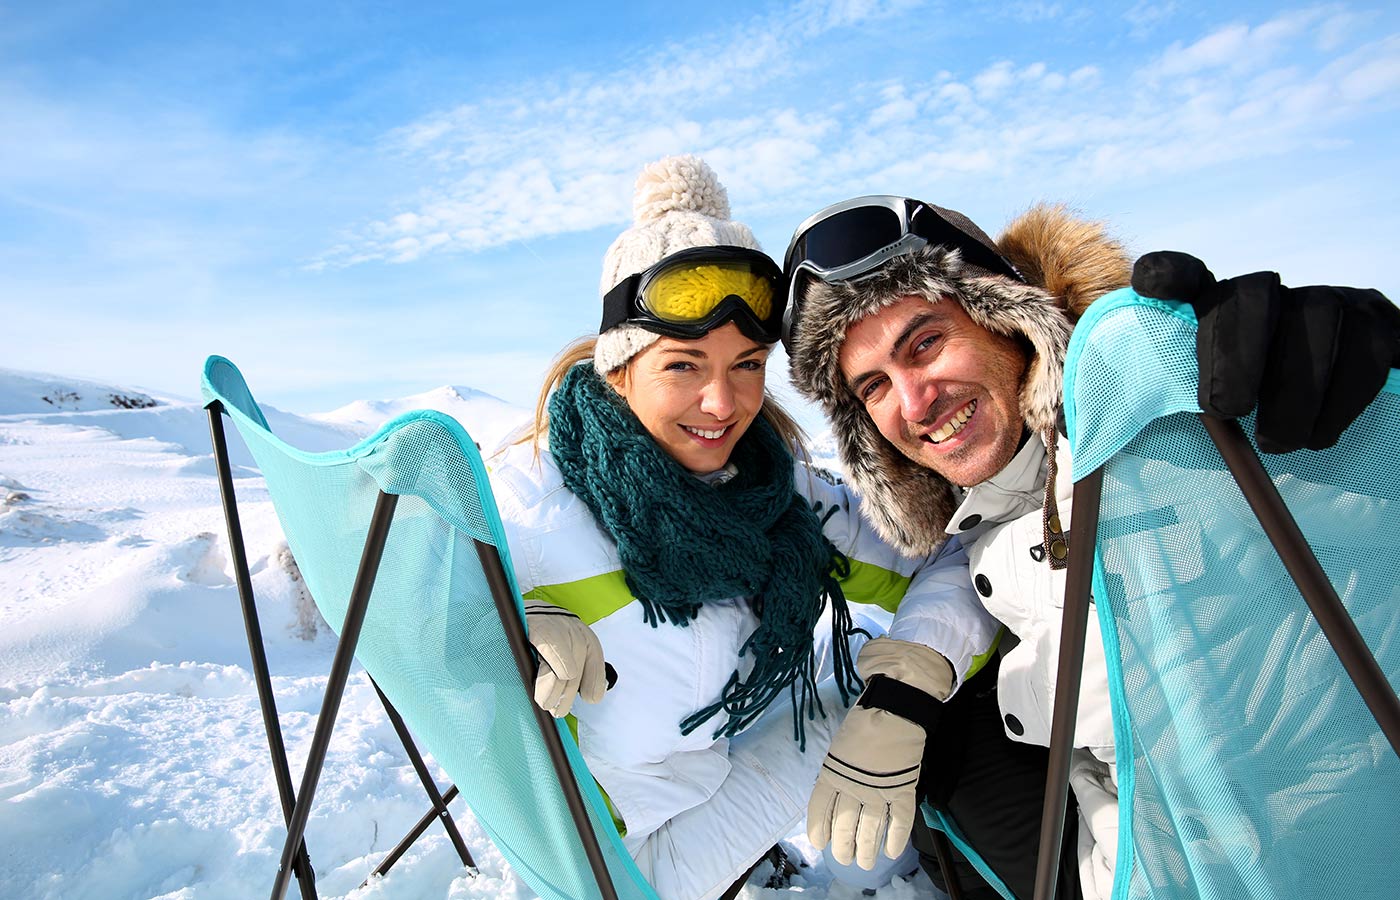 Young smiling couple with snow equipment enjoying the mountain sun on two decks in the snow